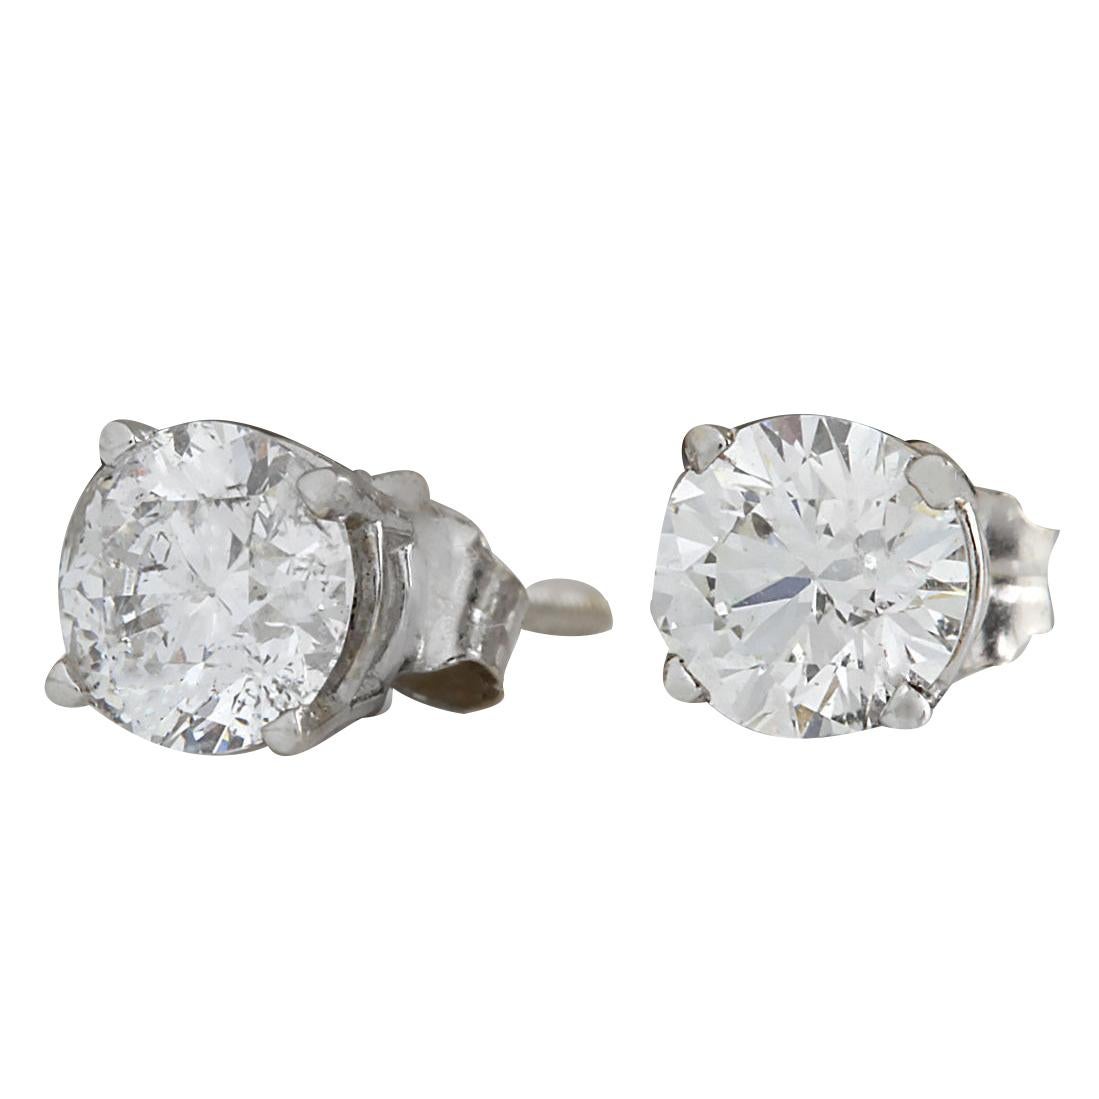 Introducing our stunning 1.00 Carat Diamond 14 Karat White Gold Earrings. Crafted from stamped 14K White Gold, these earrings have a total weight of 0.8 grams, ensuring both quality and durability. Both earrings showcase a dazzling diamond totaling